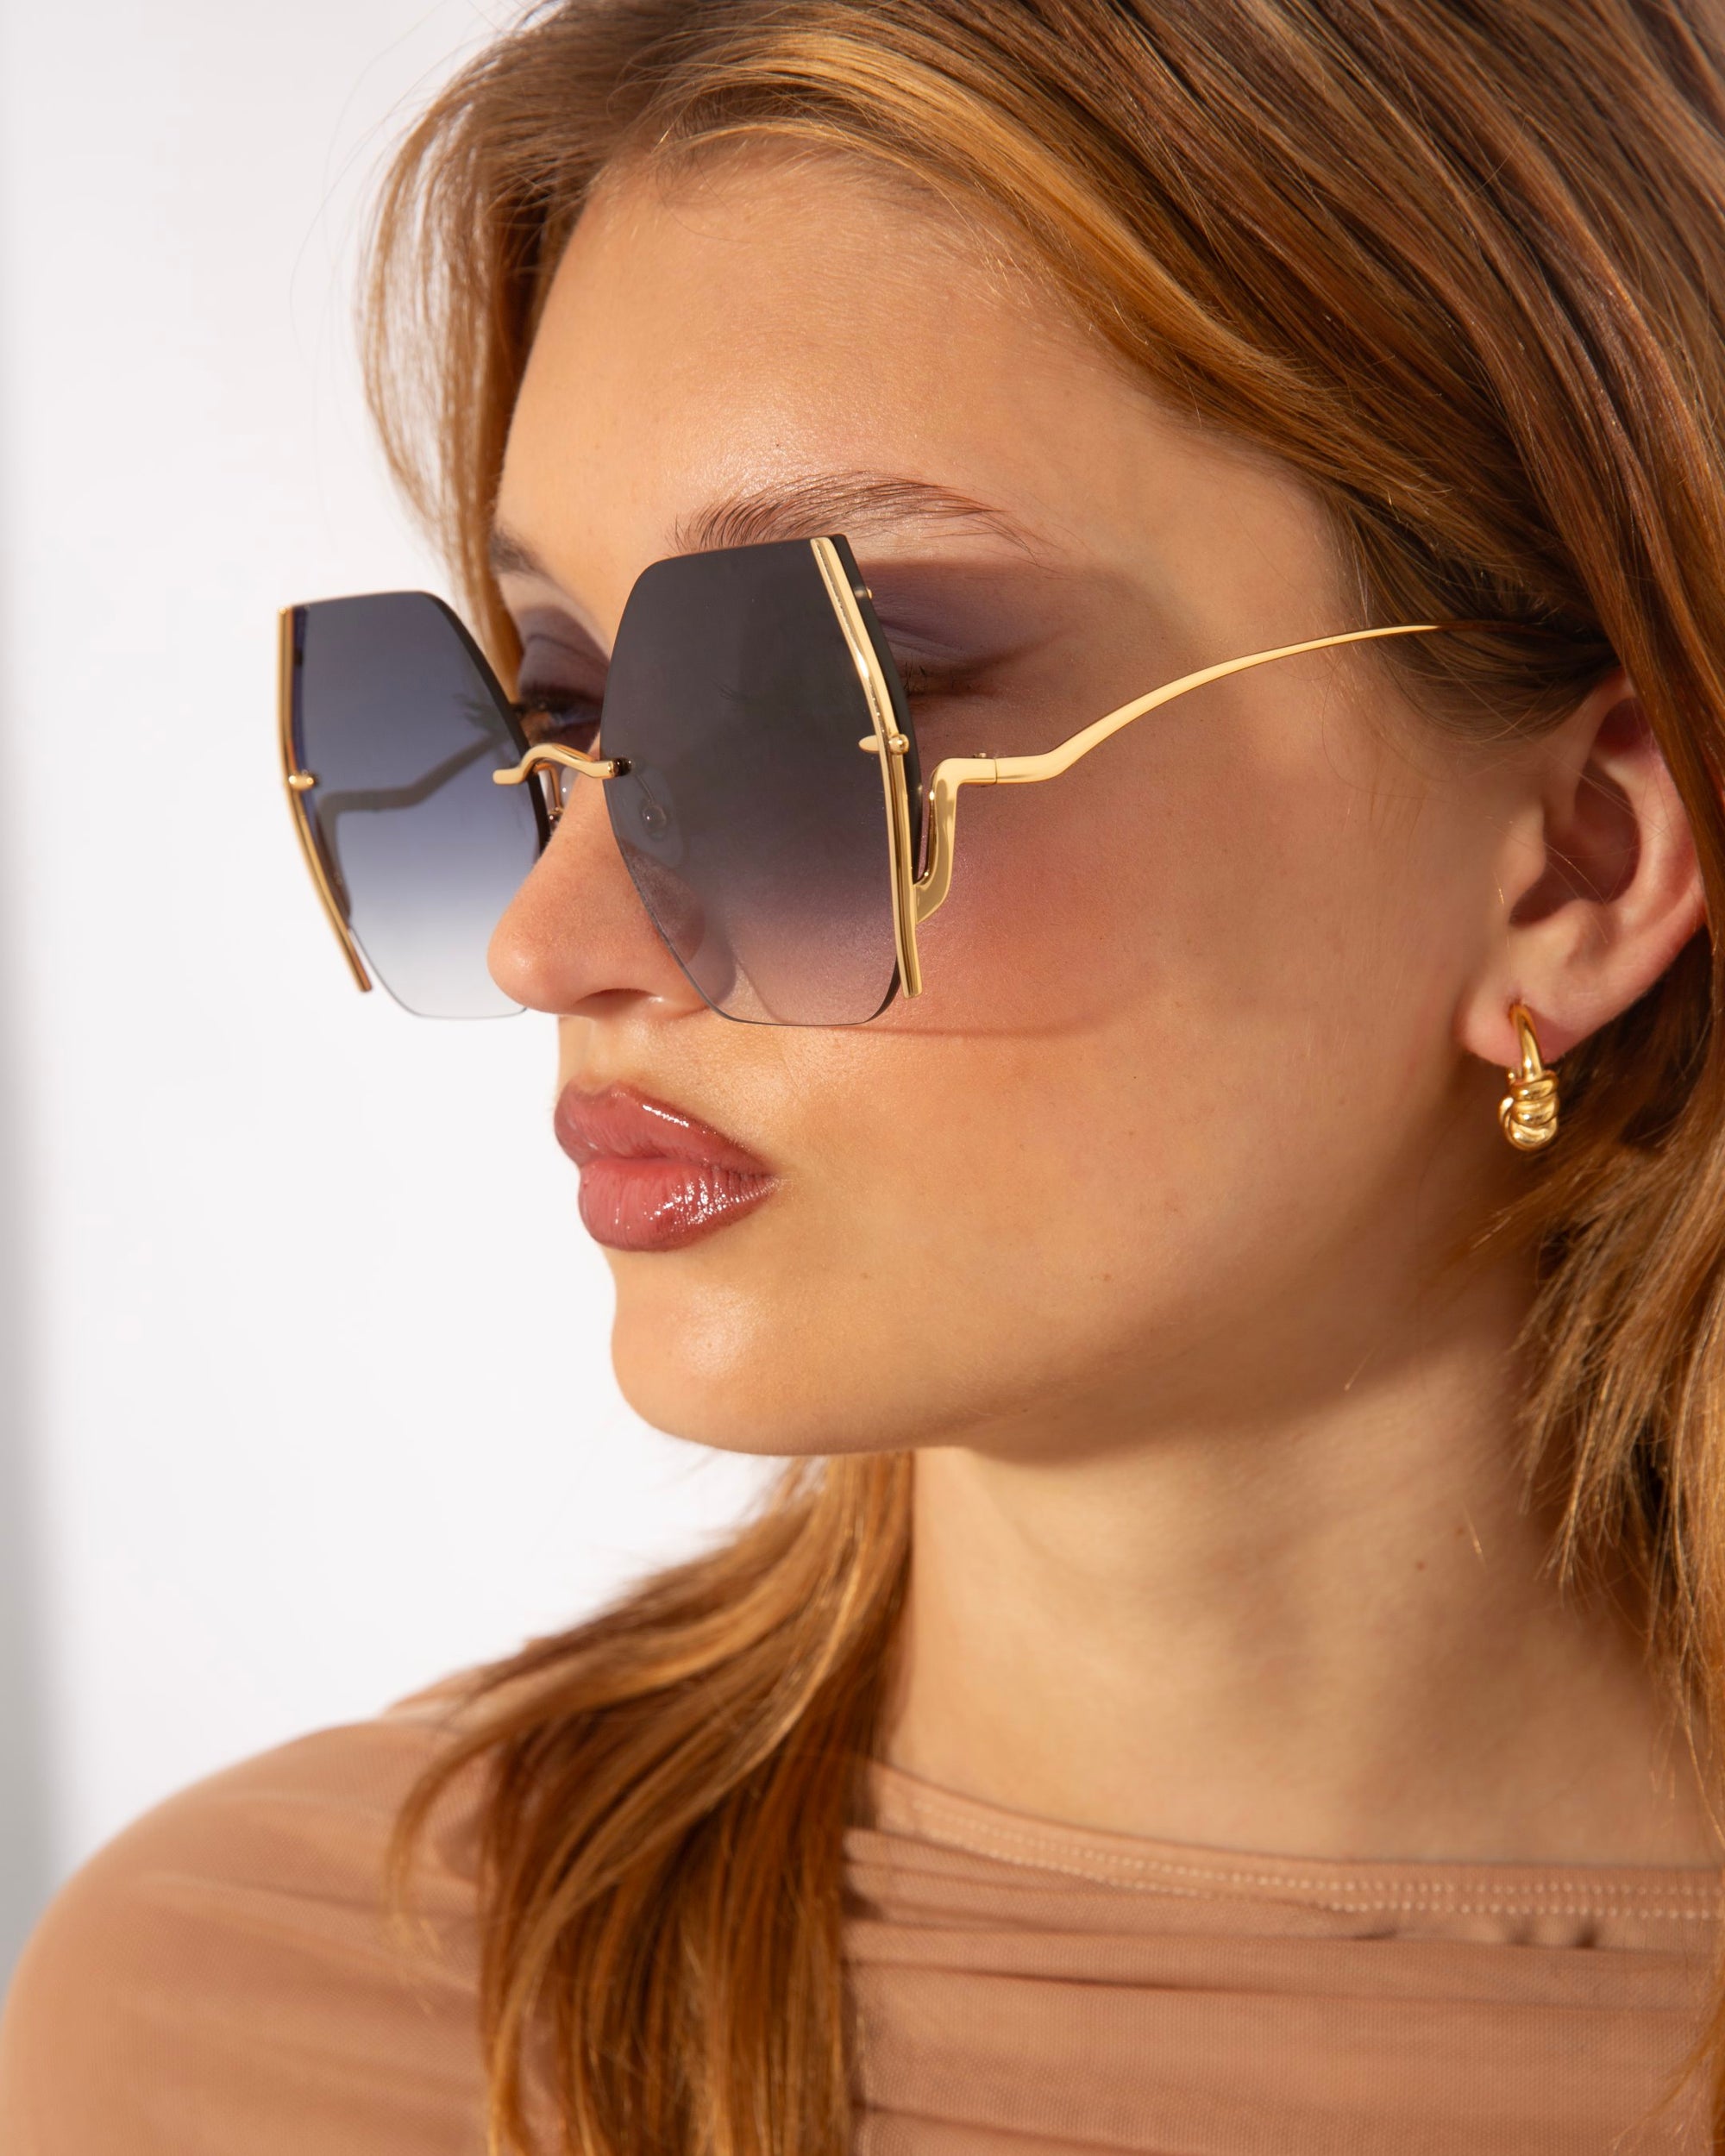 A person with long, light brown hair wears large, geometric-shaped gradient For Art&#39;s Sake® Generation sunglasses featuring jadestone nosepads and small, gold earrings. They have a neutral expression and are dressed in a light brown, semi-sheer top, shown in a side profile against a plain background.